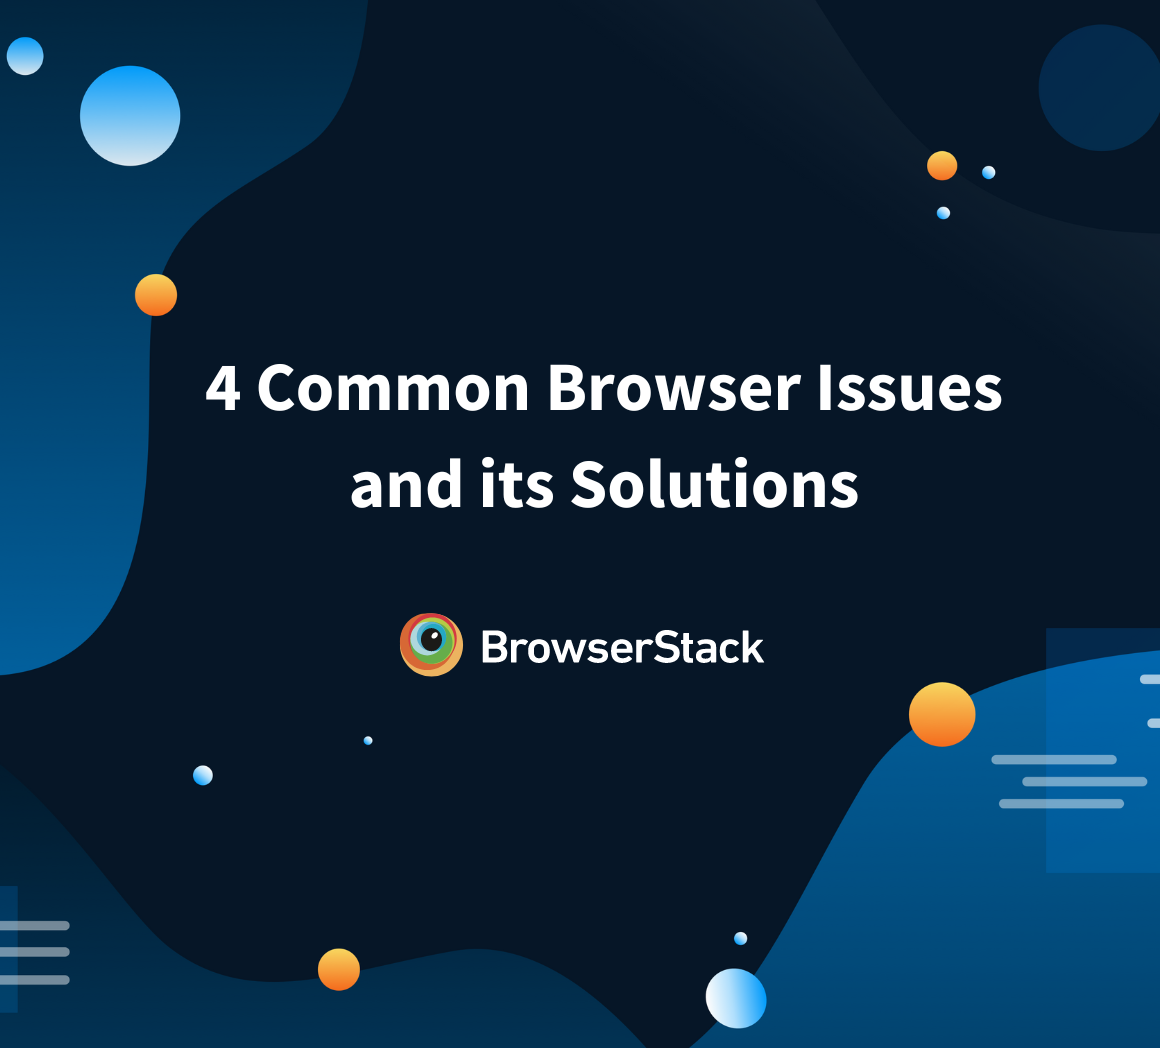 4 Common Browser Issues and its Solutions